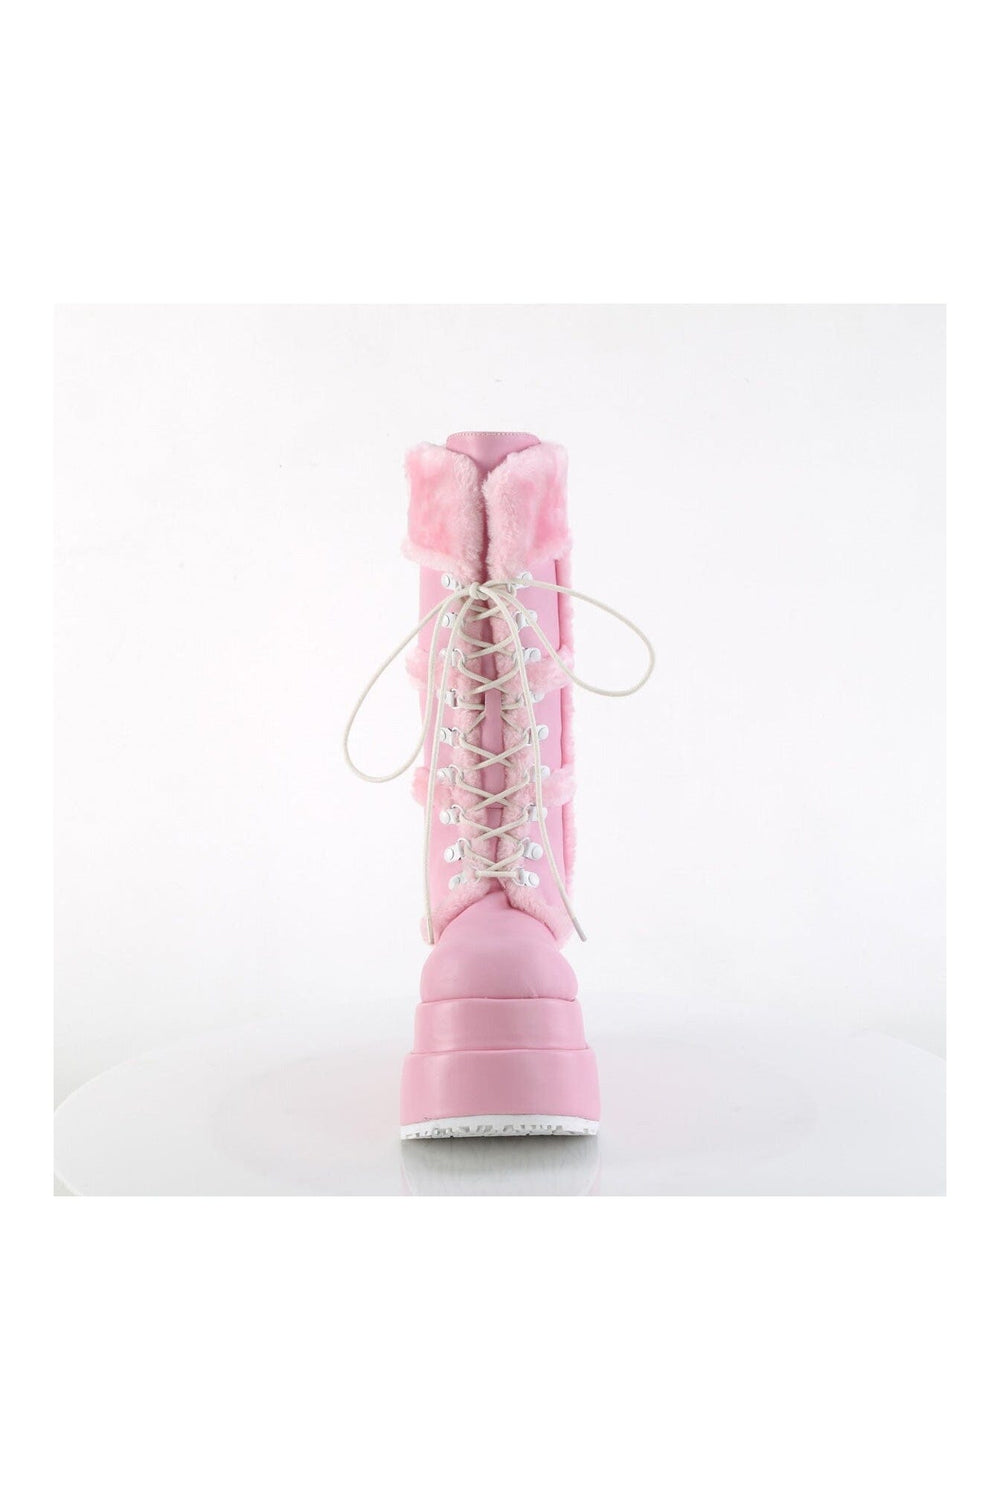 BEAR-202 Pink Vegan Leather Knee Boot-Knee Boots-Demonia-SEXYSHOES.COM